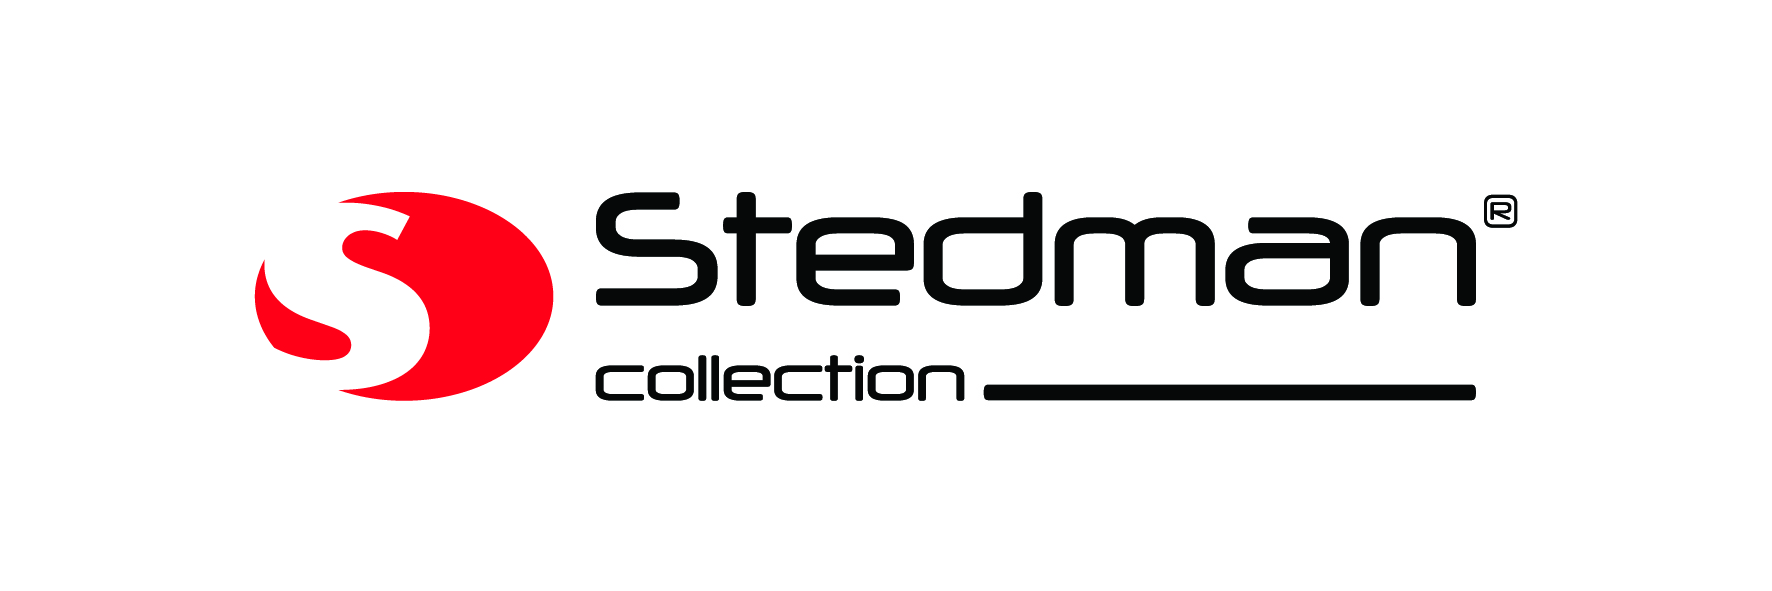 stedman-collection